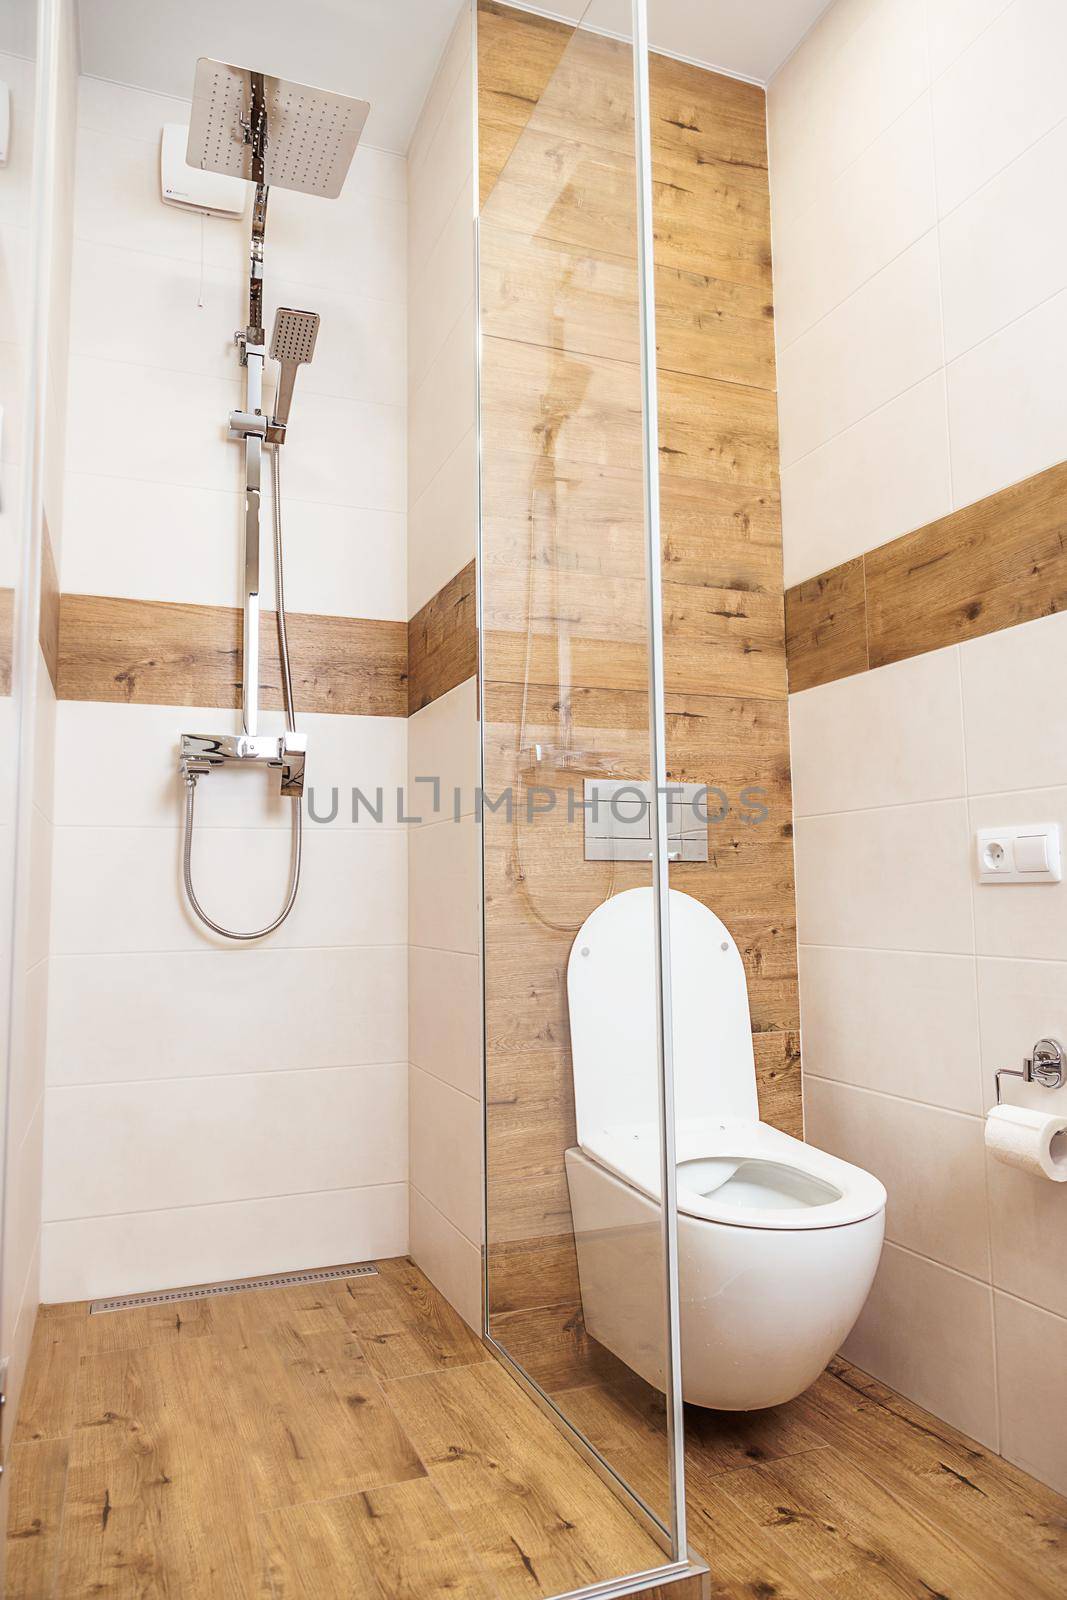 bathroom interior, closeup. Shower cabin and toilet in a modern minimalist style by Ramanouskaya